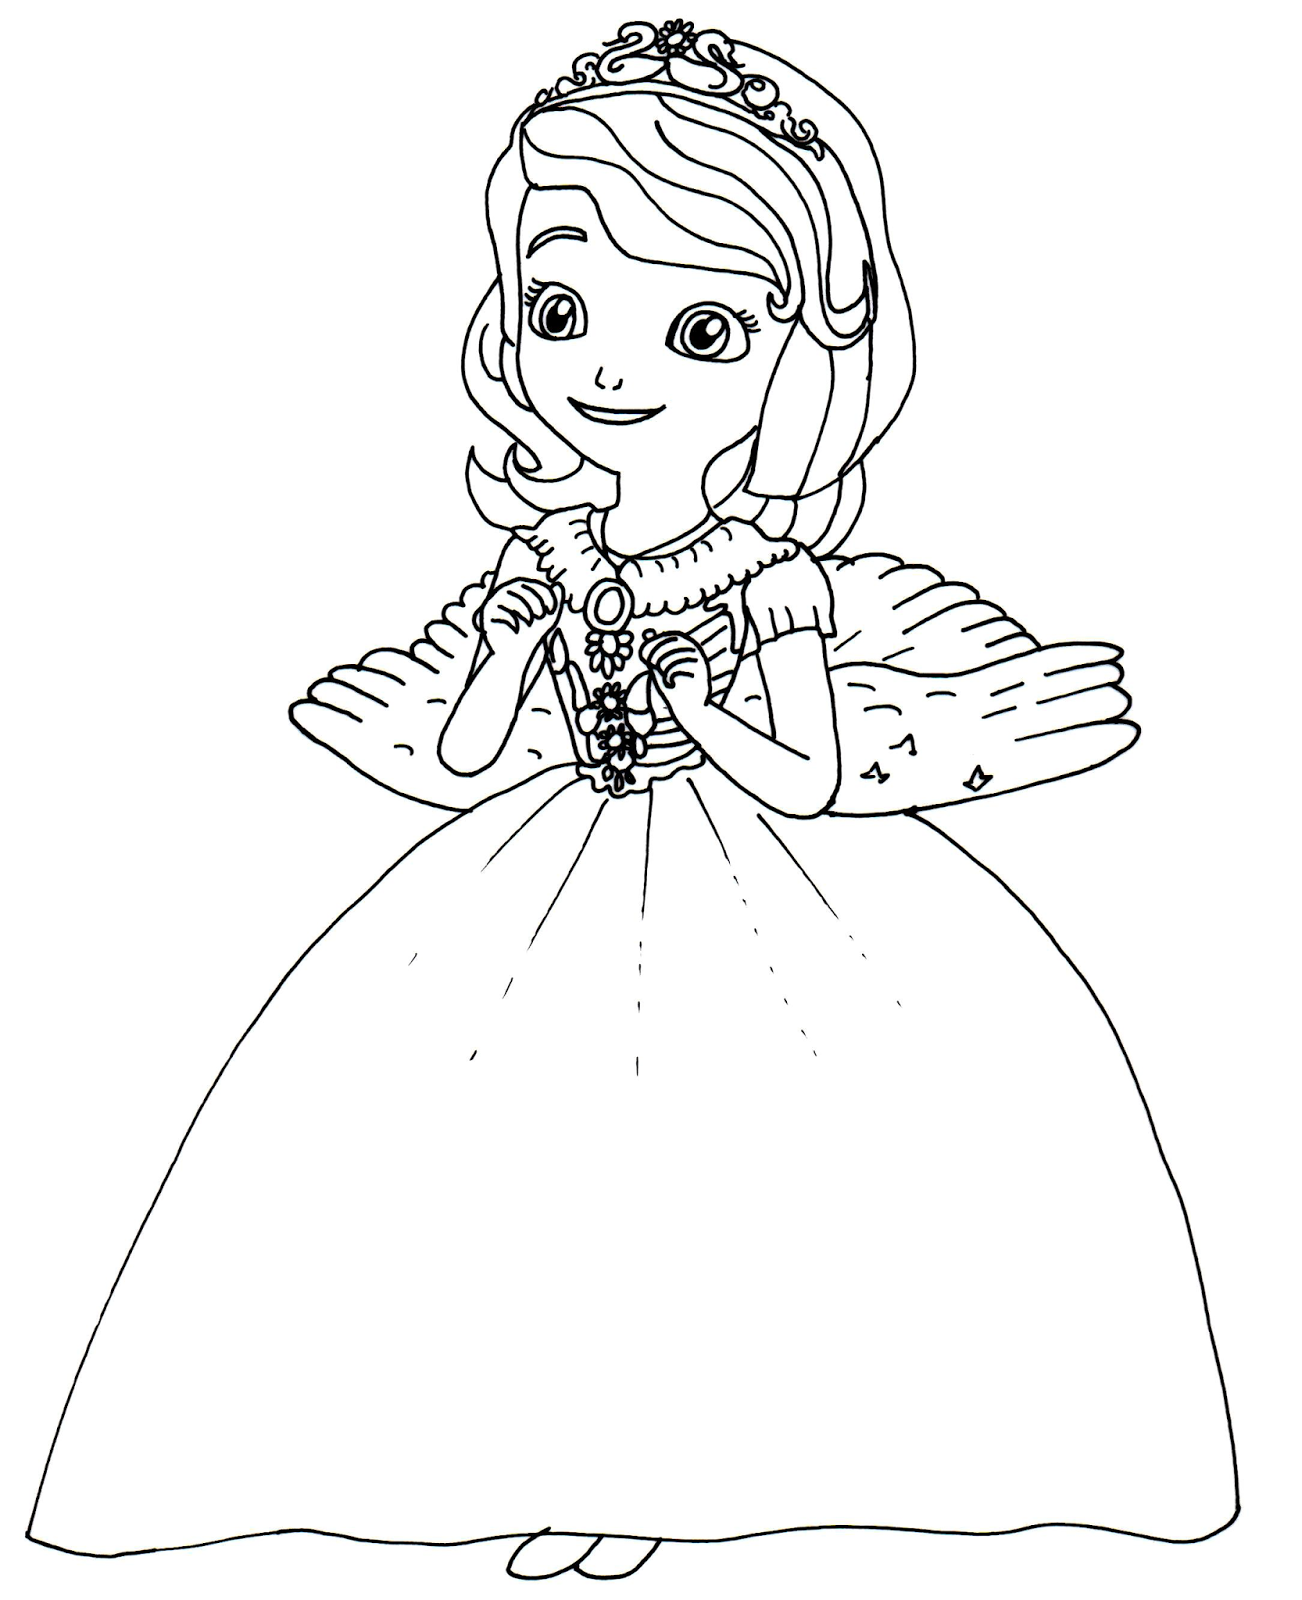 Sofia The First Coloring Pages: Halloween Costume - Sofia the ...